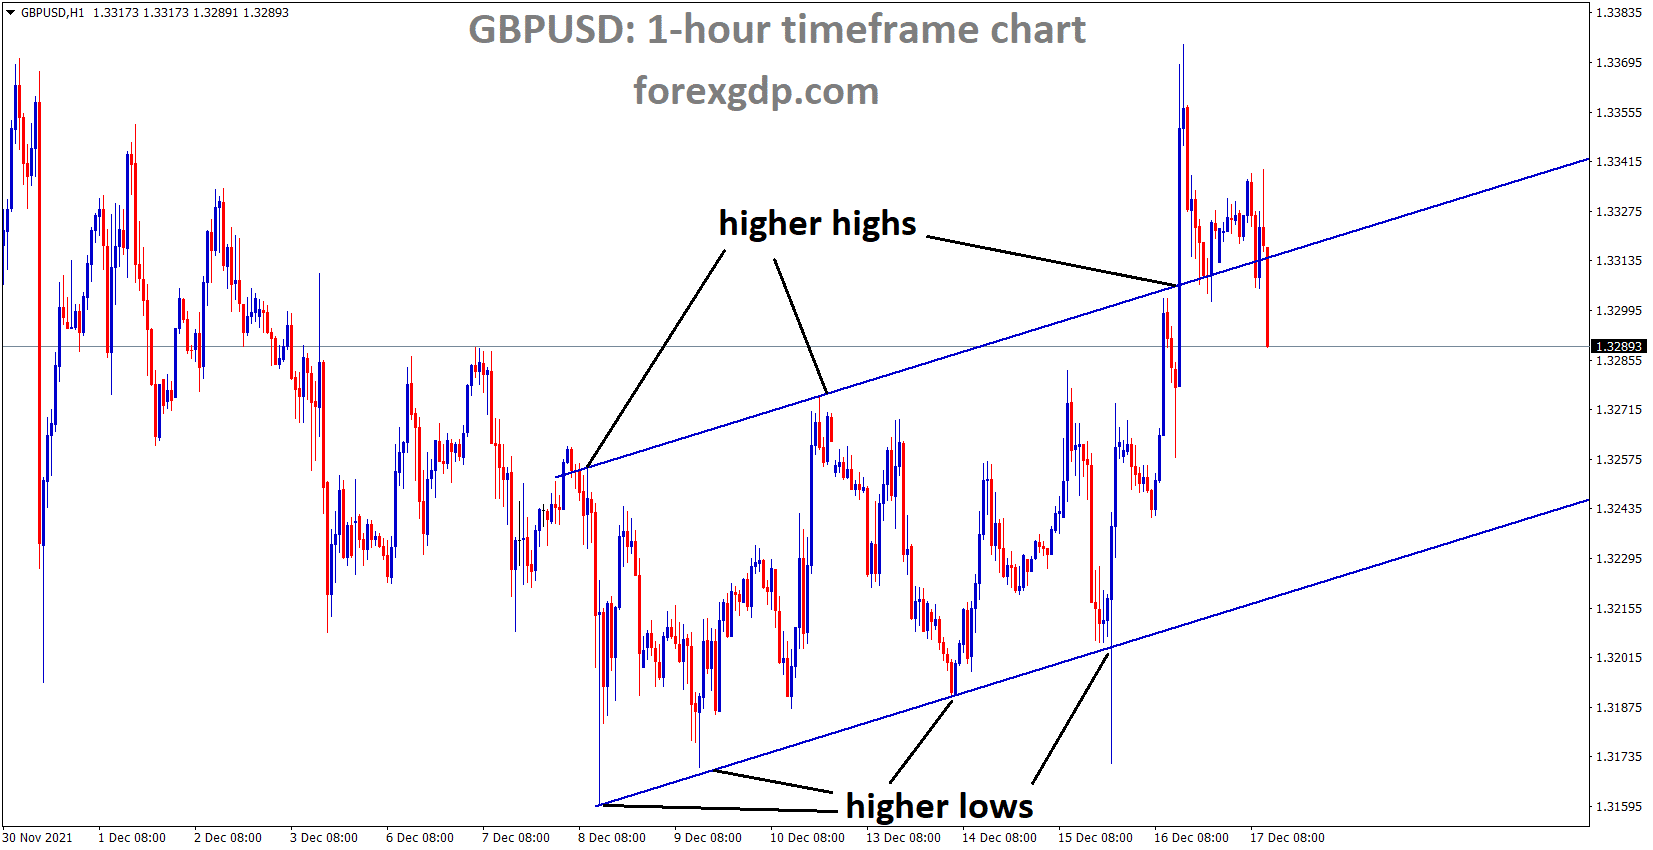 GBPUSD is moving in an Ascending channel and the market fell from the higher high area of the channel 2